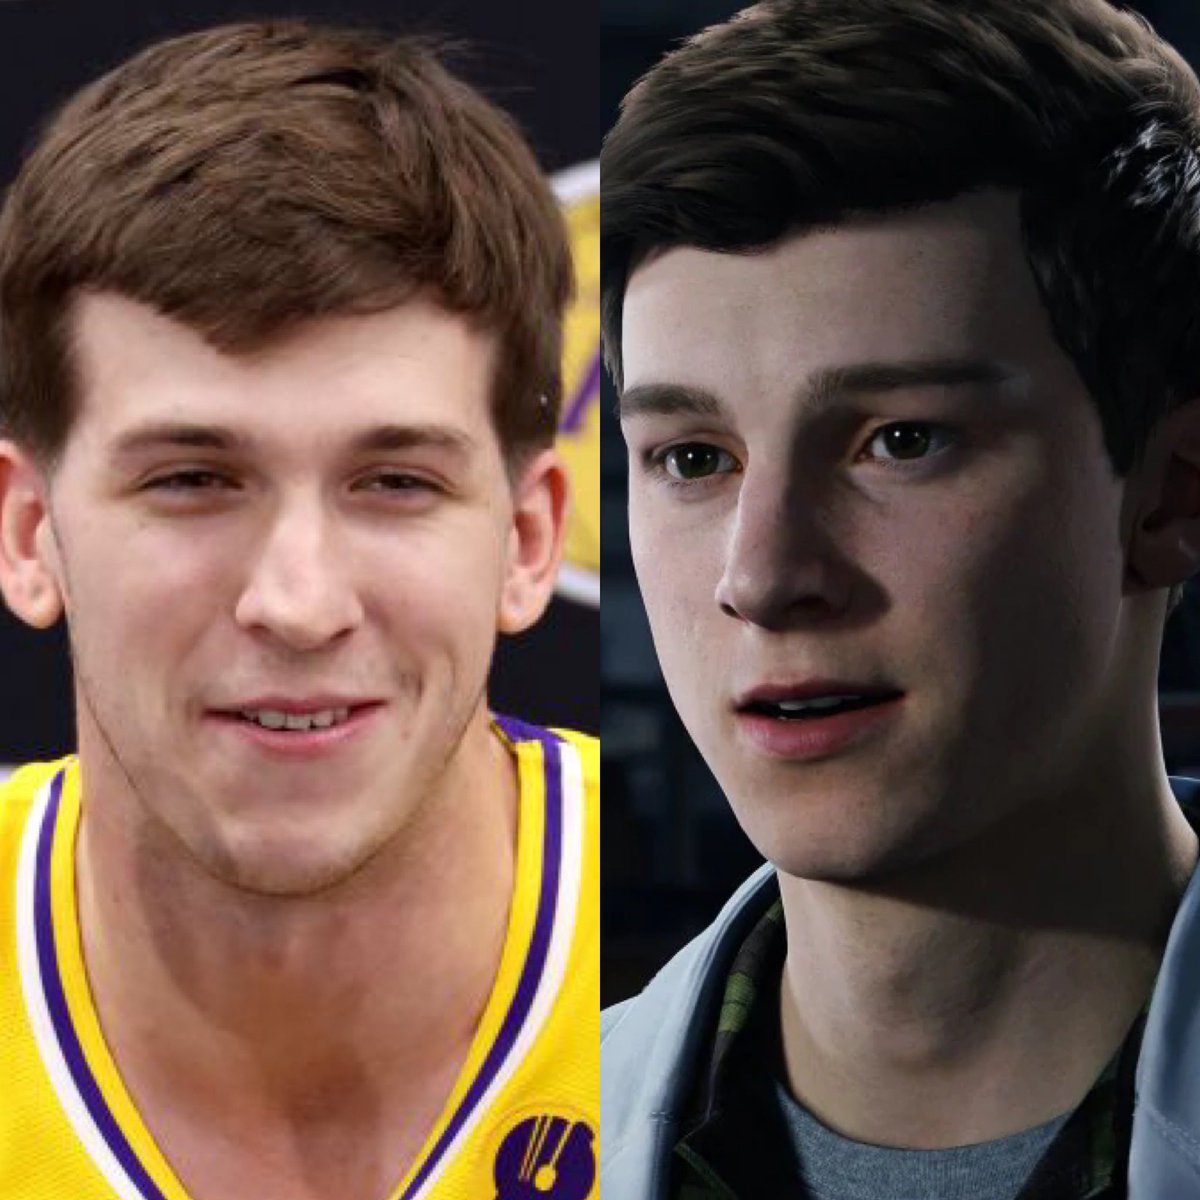 Lakers got PS5 Spider-Man on they roster https://t.co/FHx2MaTUr2